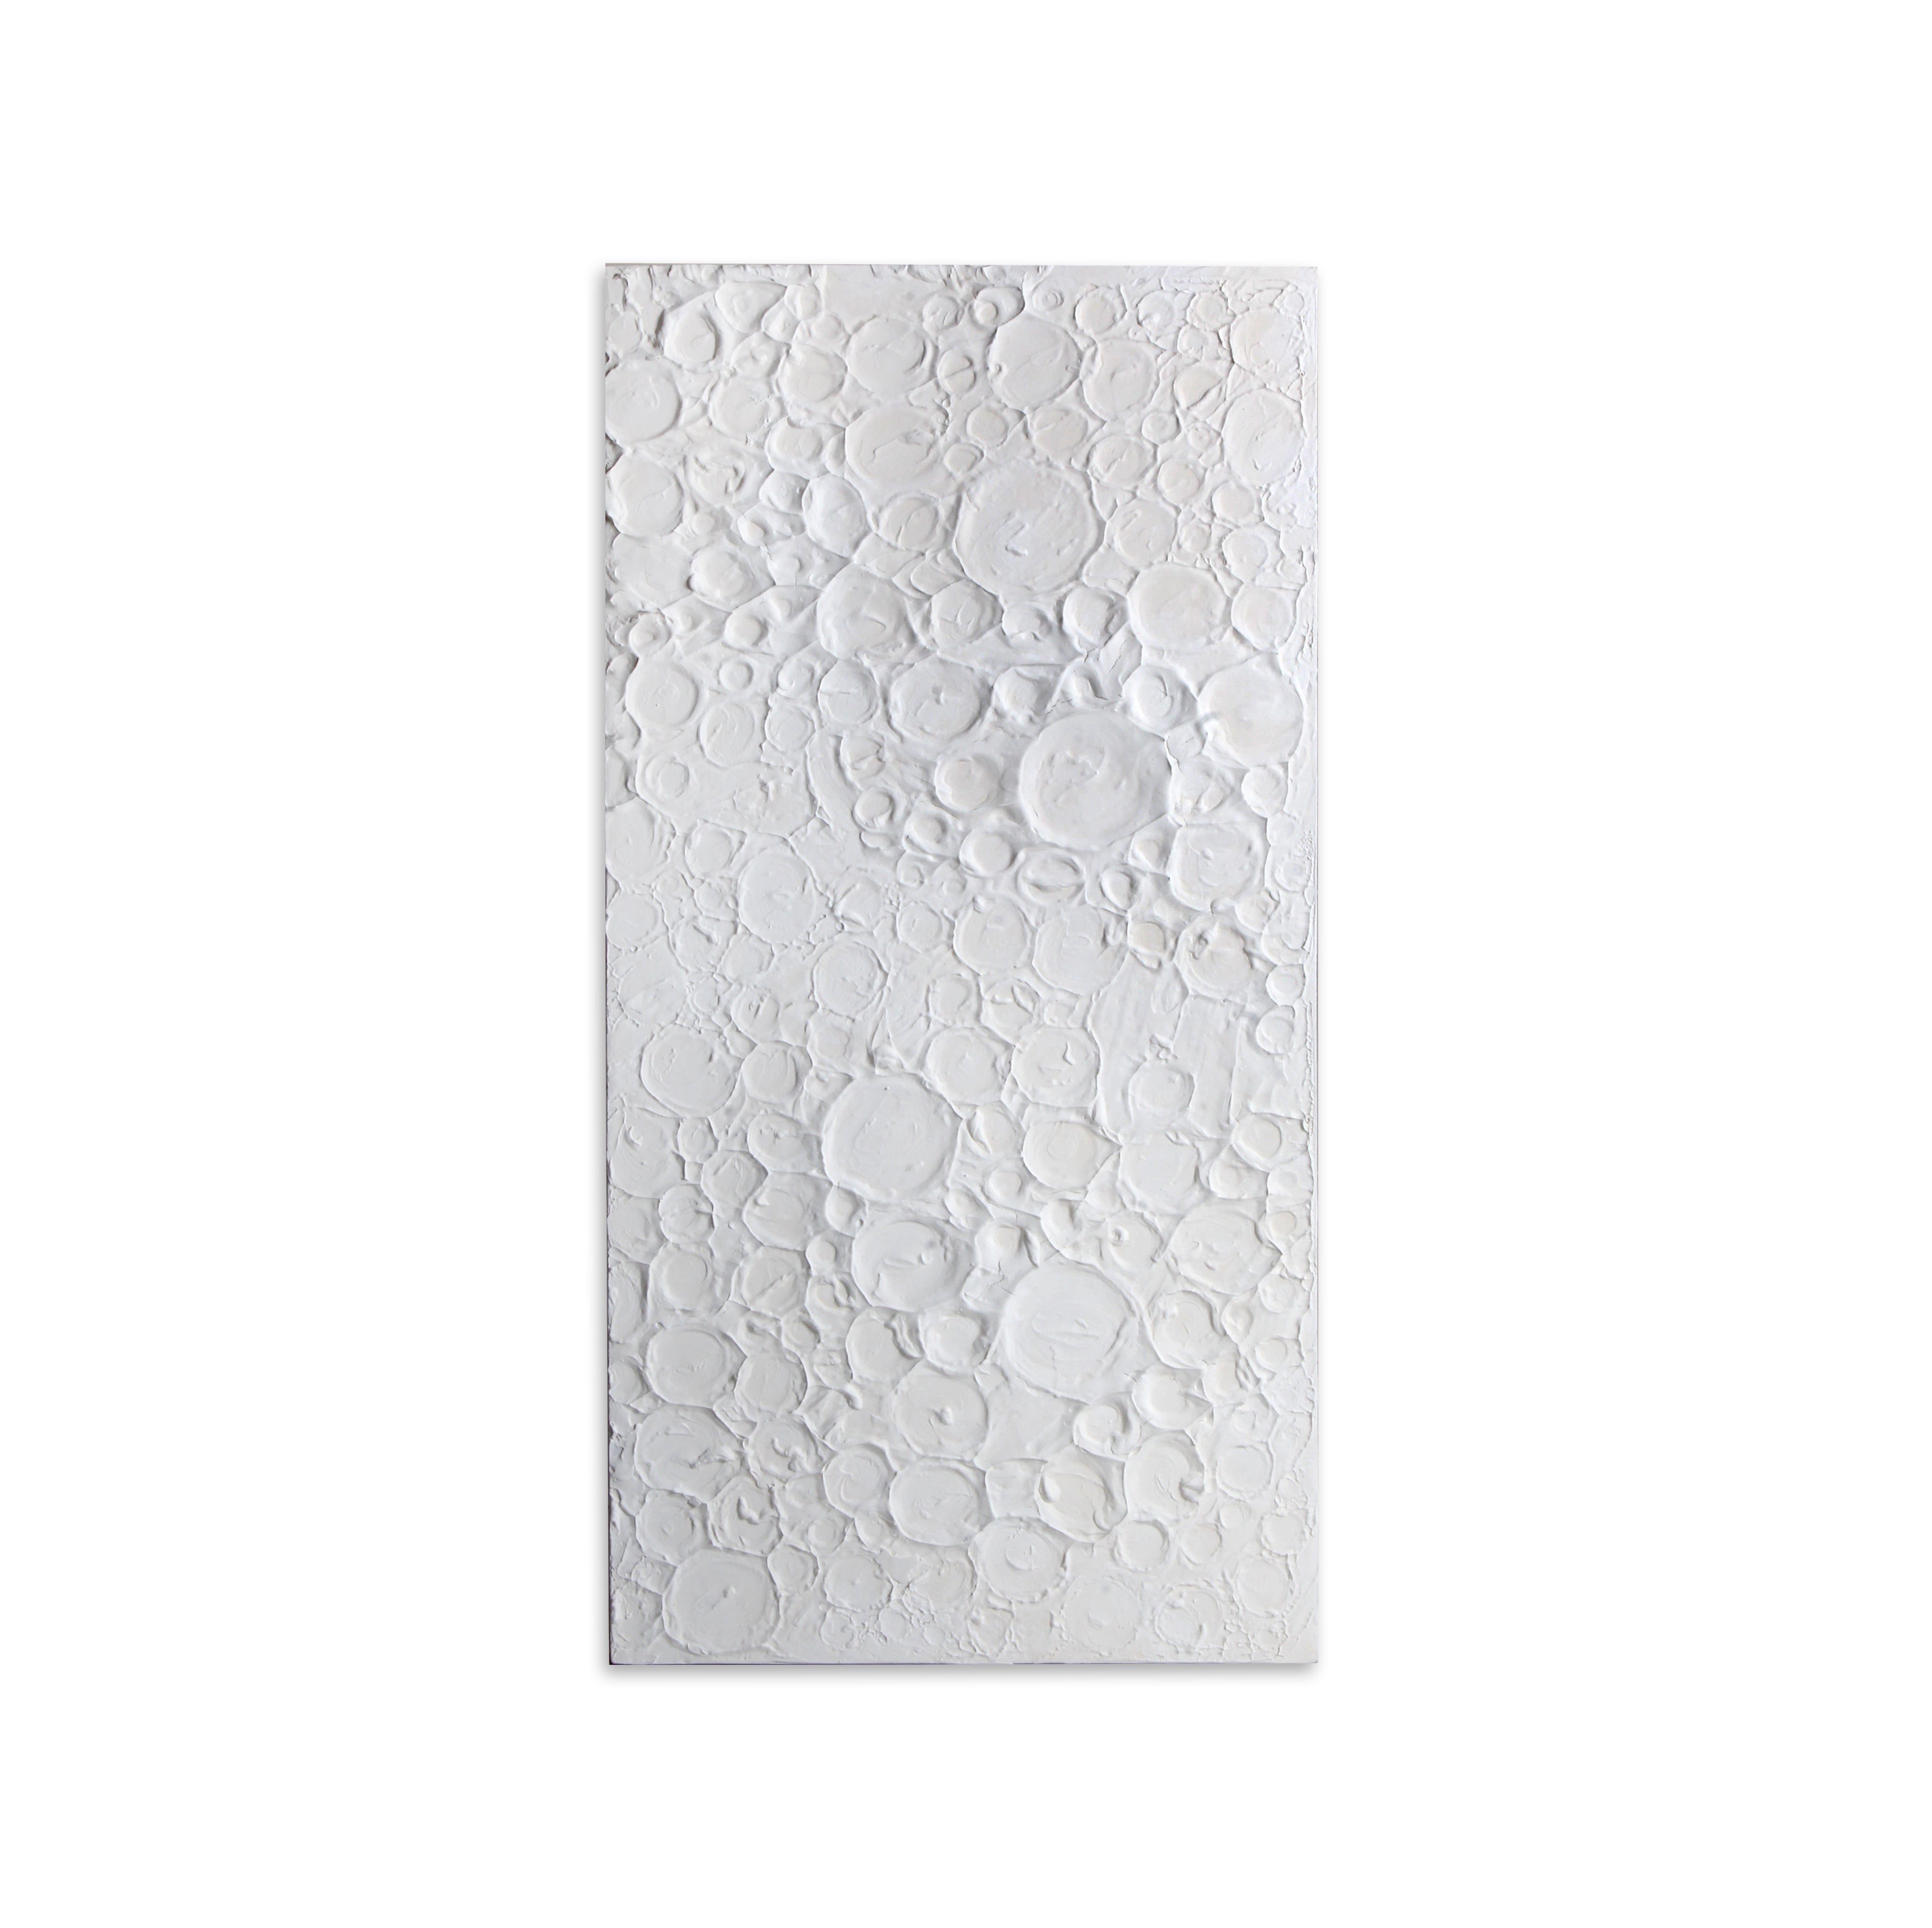 Wall Decor Moon Surface Approx H36 X L18 X D0.78inch 1pc